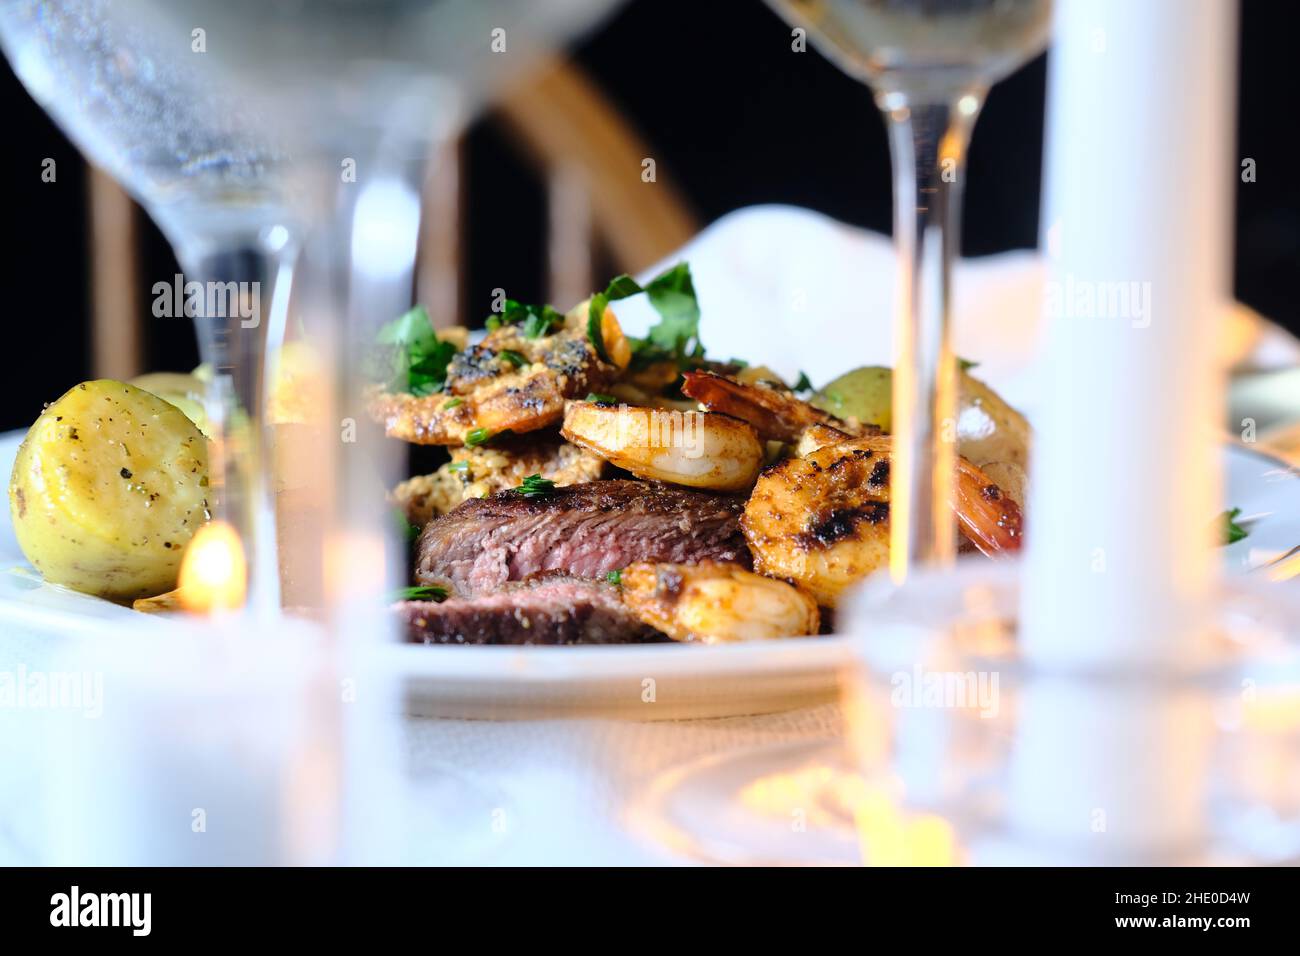 Gourmet surf and turf cajun shrimp and steak dinner entree with new potatoes at a fancy expensive wedding Stock Photo